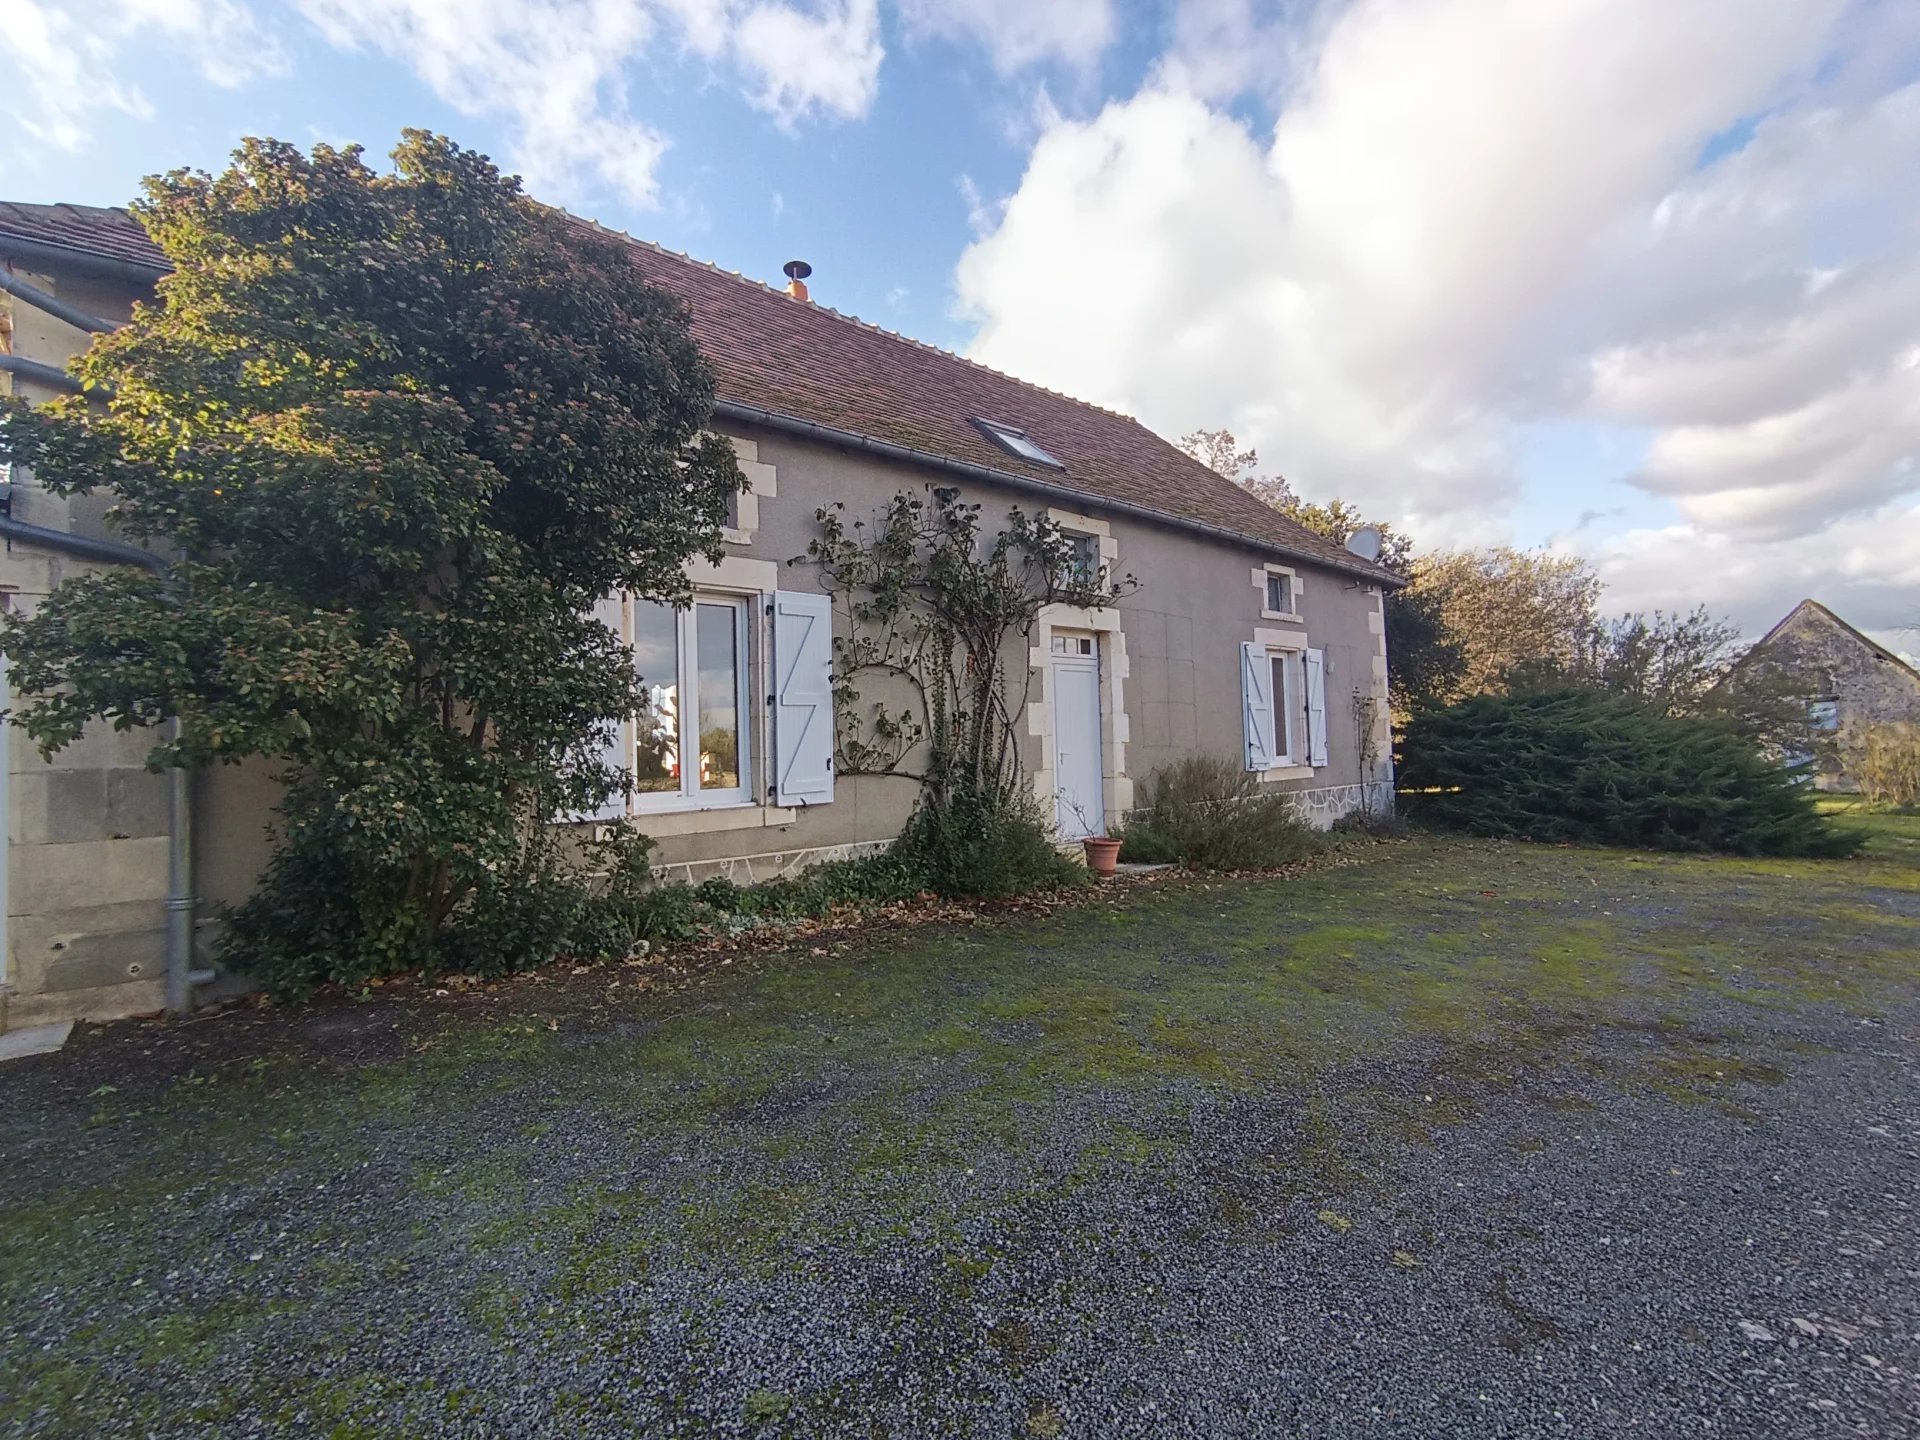 Charming 5 bedroom property on nearly 3 hectares